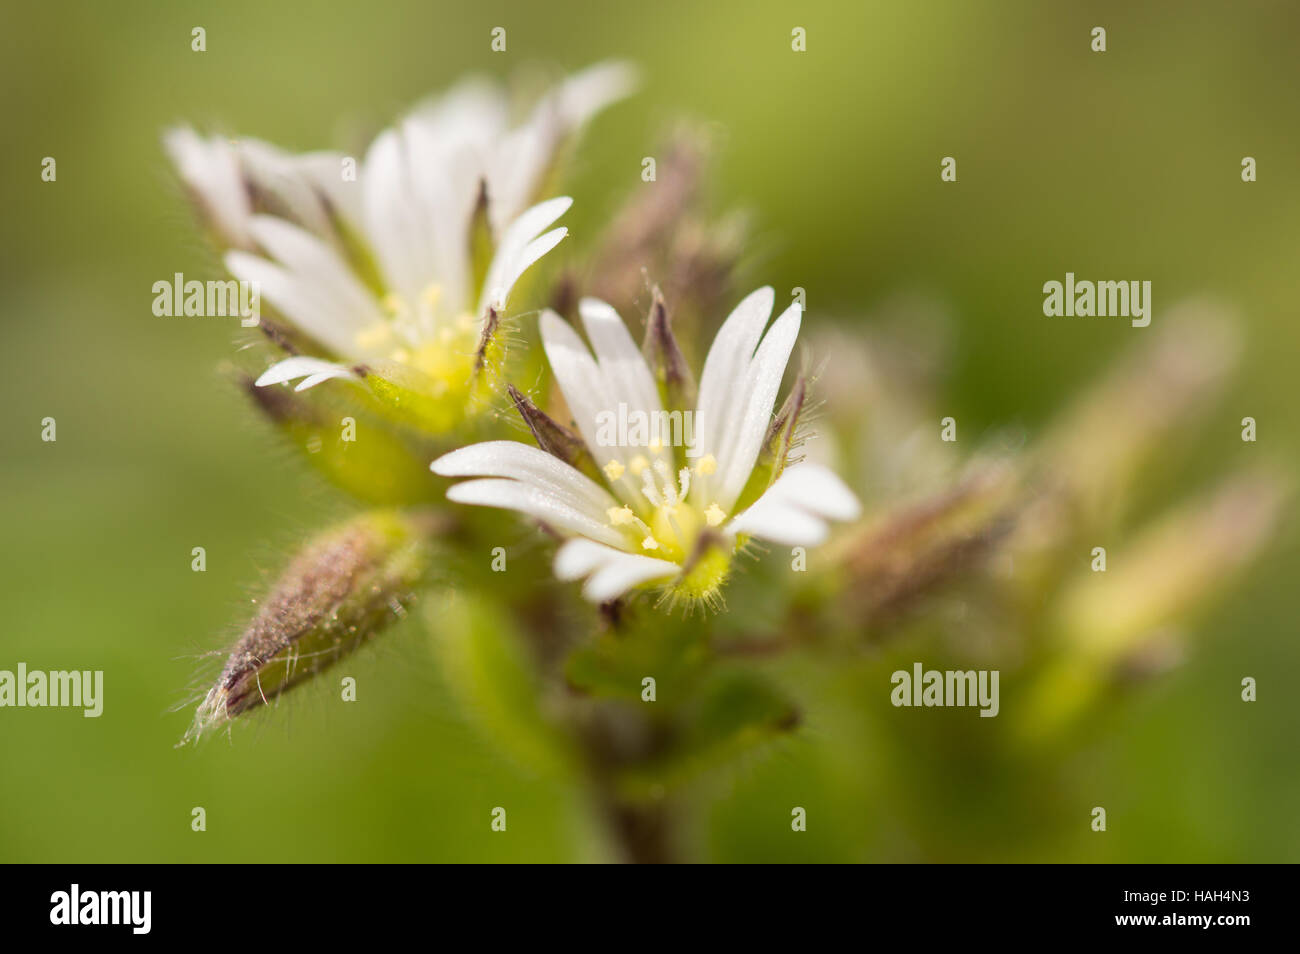 A close-up of Mouse-ear Chickweed (Cerastium fontanum) flowers. Stock Photo